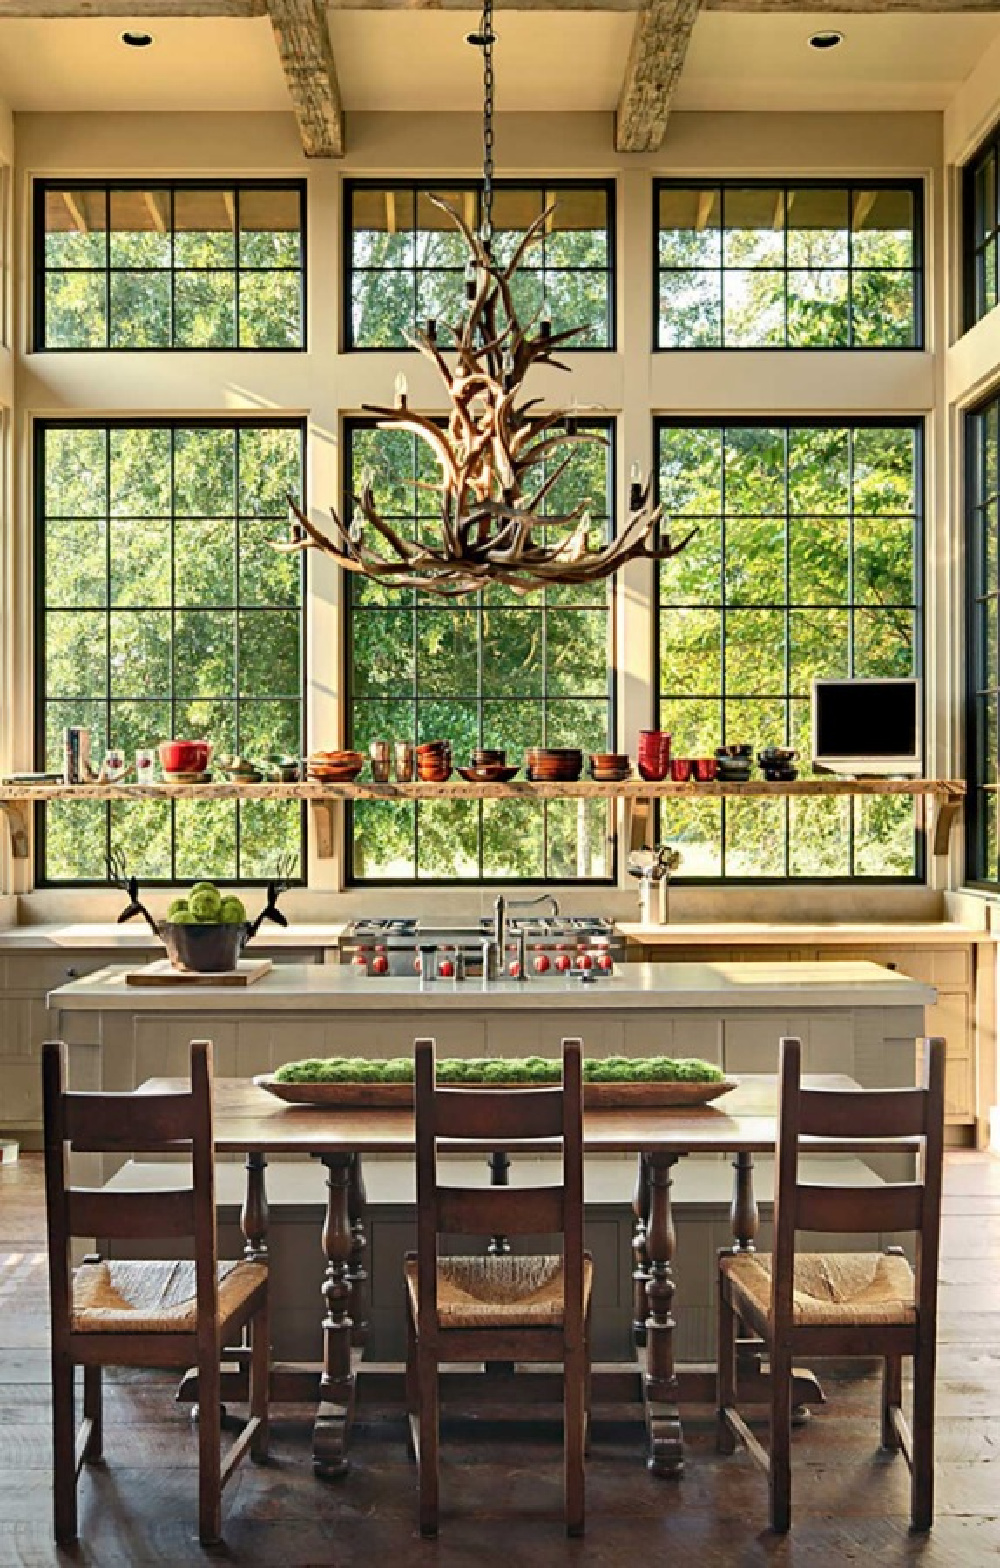 Timeless architecture and design by Atlanta-based Jeffrey Dungan who mixes rustic with elegant in luxury home design. #architecture #luxuryhome #jeffreydungan #timelessdesign #sophisticateddesign